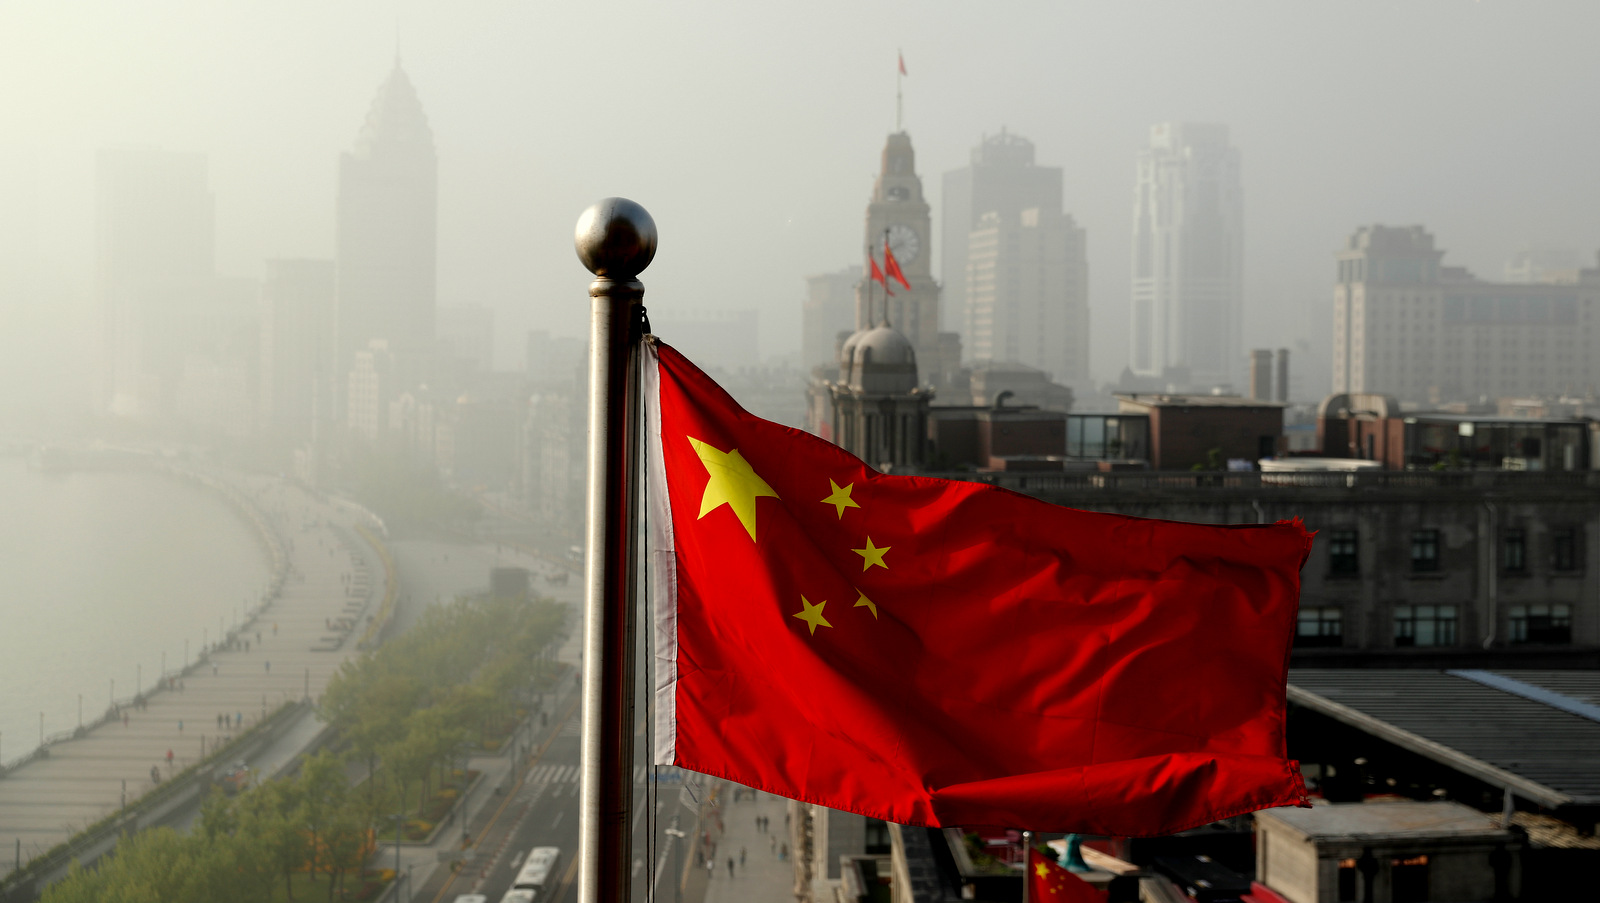 A Chinese national flag flutters against the office buildings at the Shanghai Bund shrouded by pollution and fog in Shanghai, China, Thursday, April 14, 2016. World finance officials who meet in Washington this week confront a bleak picture: Eight years after the financial crisis erupted, the global economy remains fragile and at risk of another recession. (AP Photo/Andy Wong)